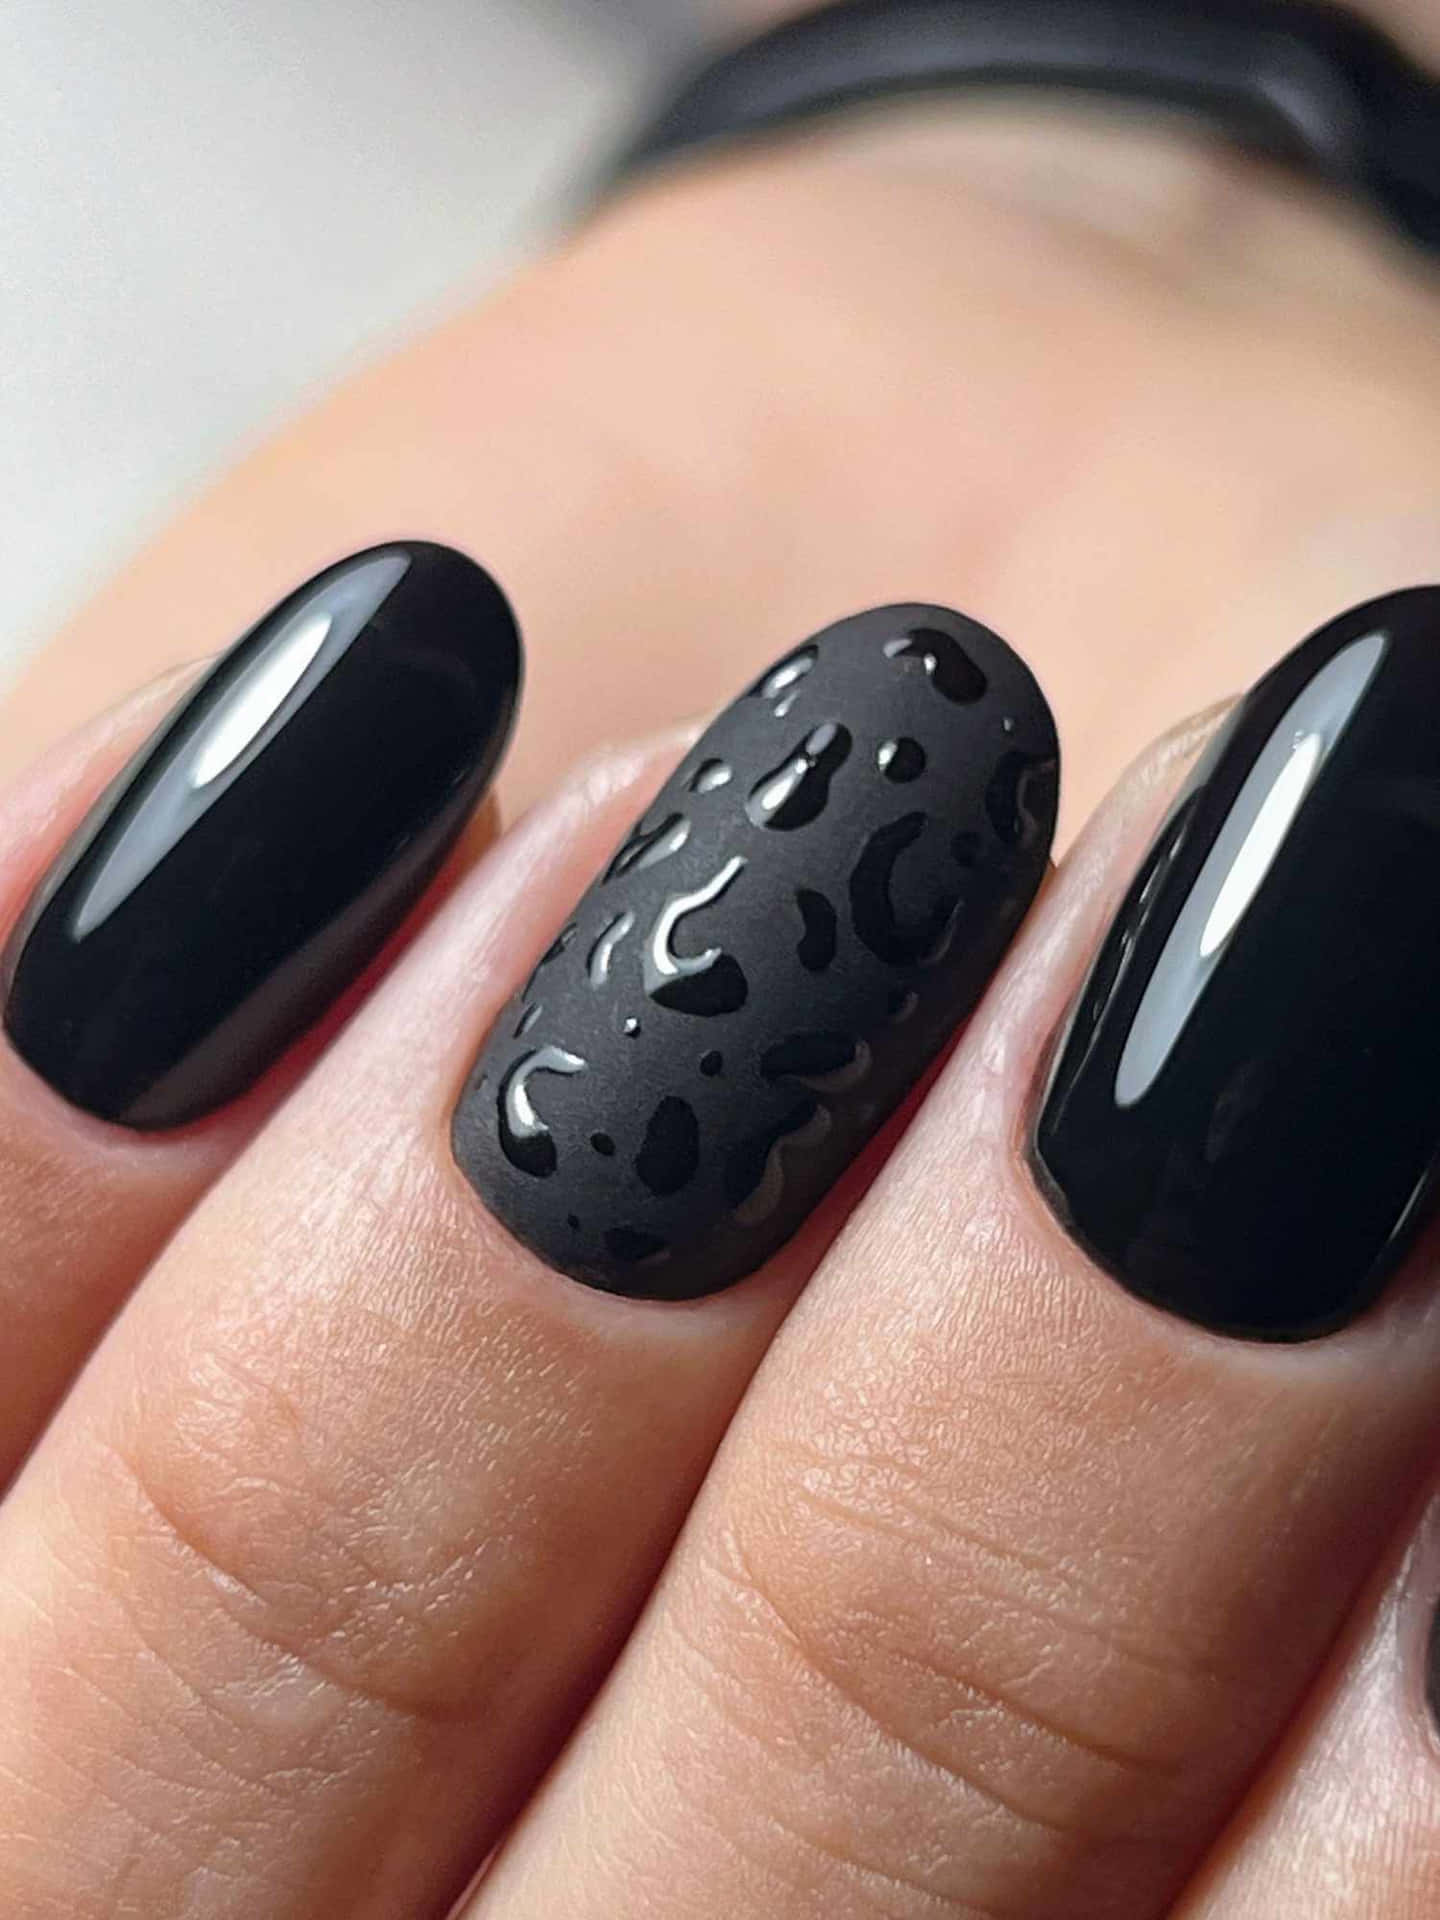 Matte Black Stiletto Press On Acrylic Nails Stiletto Black With Extra Long  Tips For Girls Nail Art Manicure From Jiejingg, $30.06 | DHgate.Com